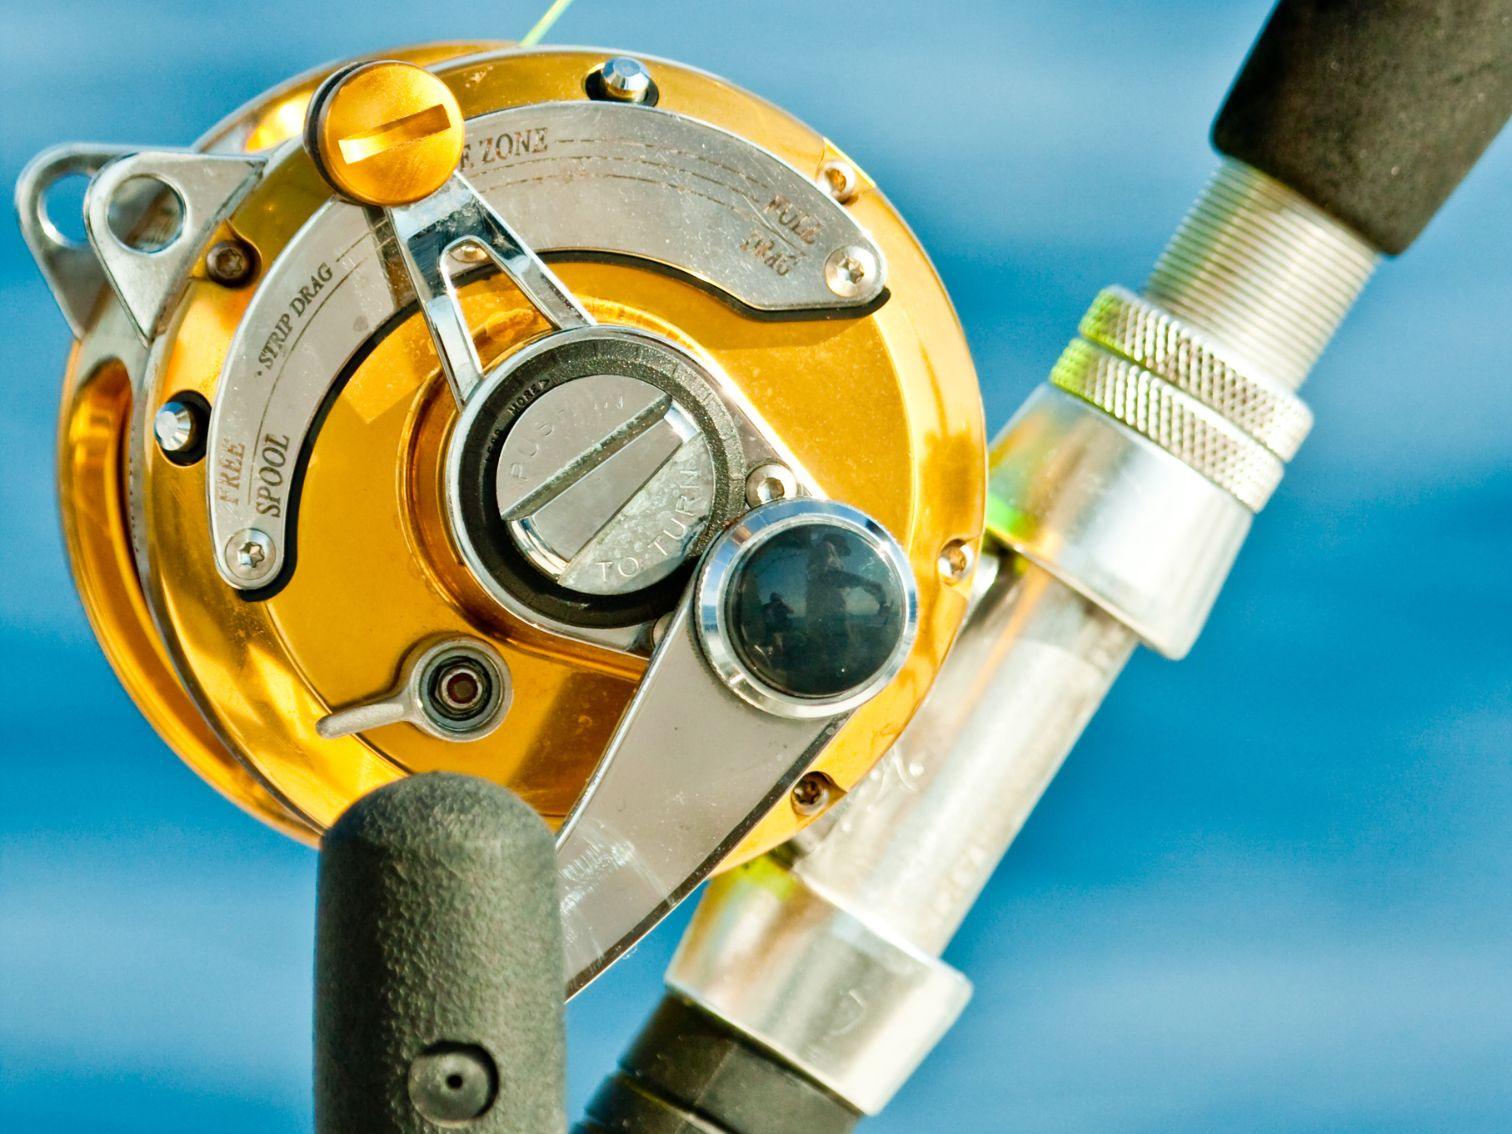 Drag won't tighten sufficiently - Fishing Rods, Reels, Line, and